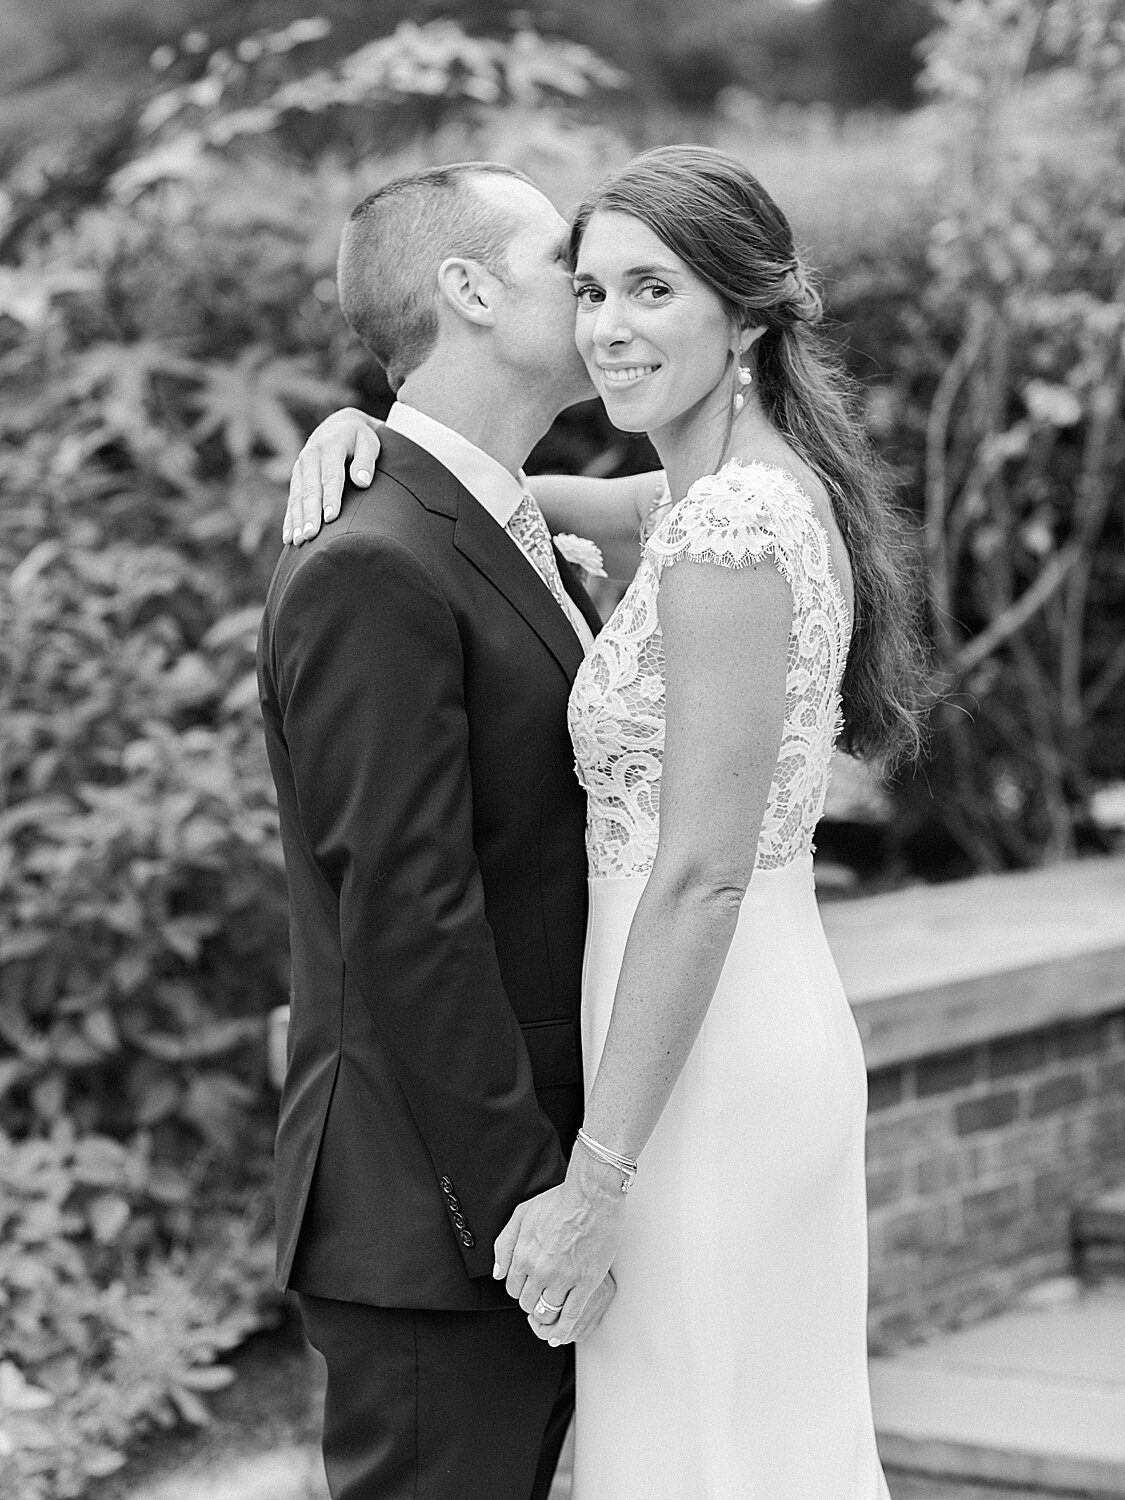 groom kisses bride's cheek during NYC wedding | Asher Gardner Photography | Elopement at the Central Park Conservatory Gardens